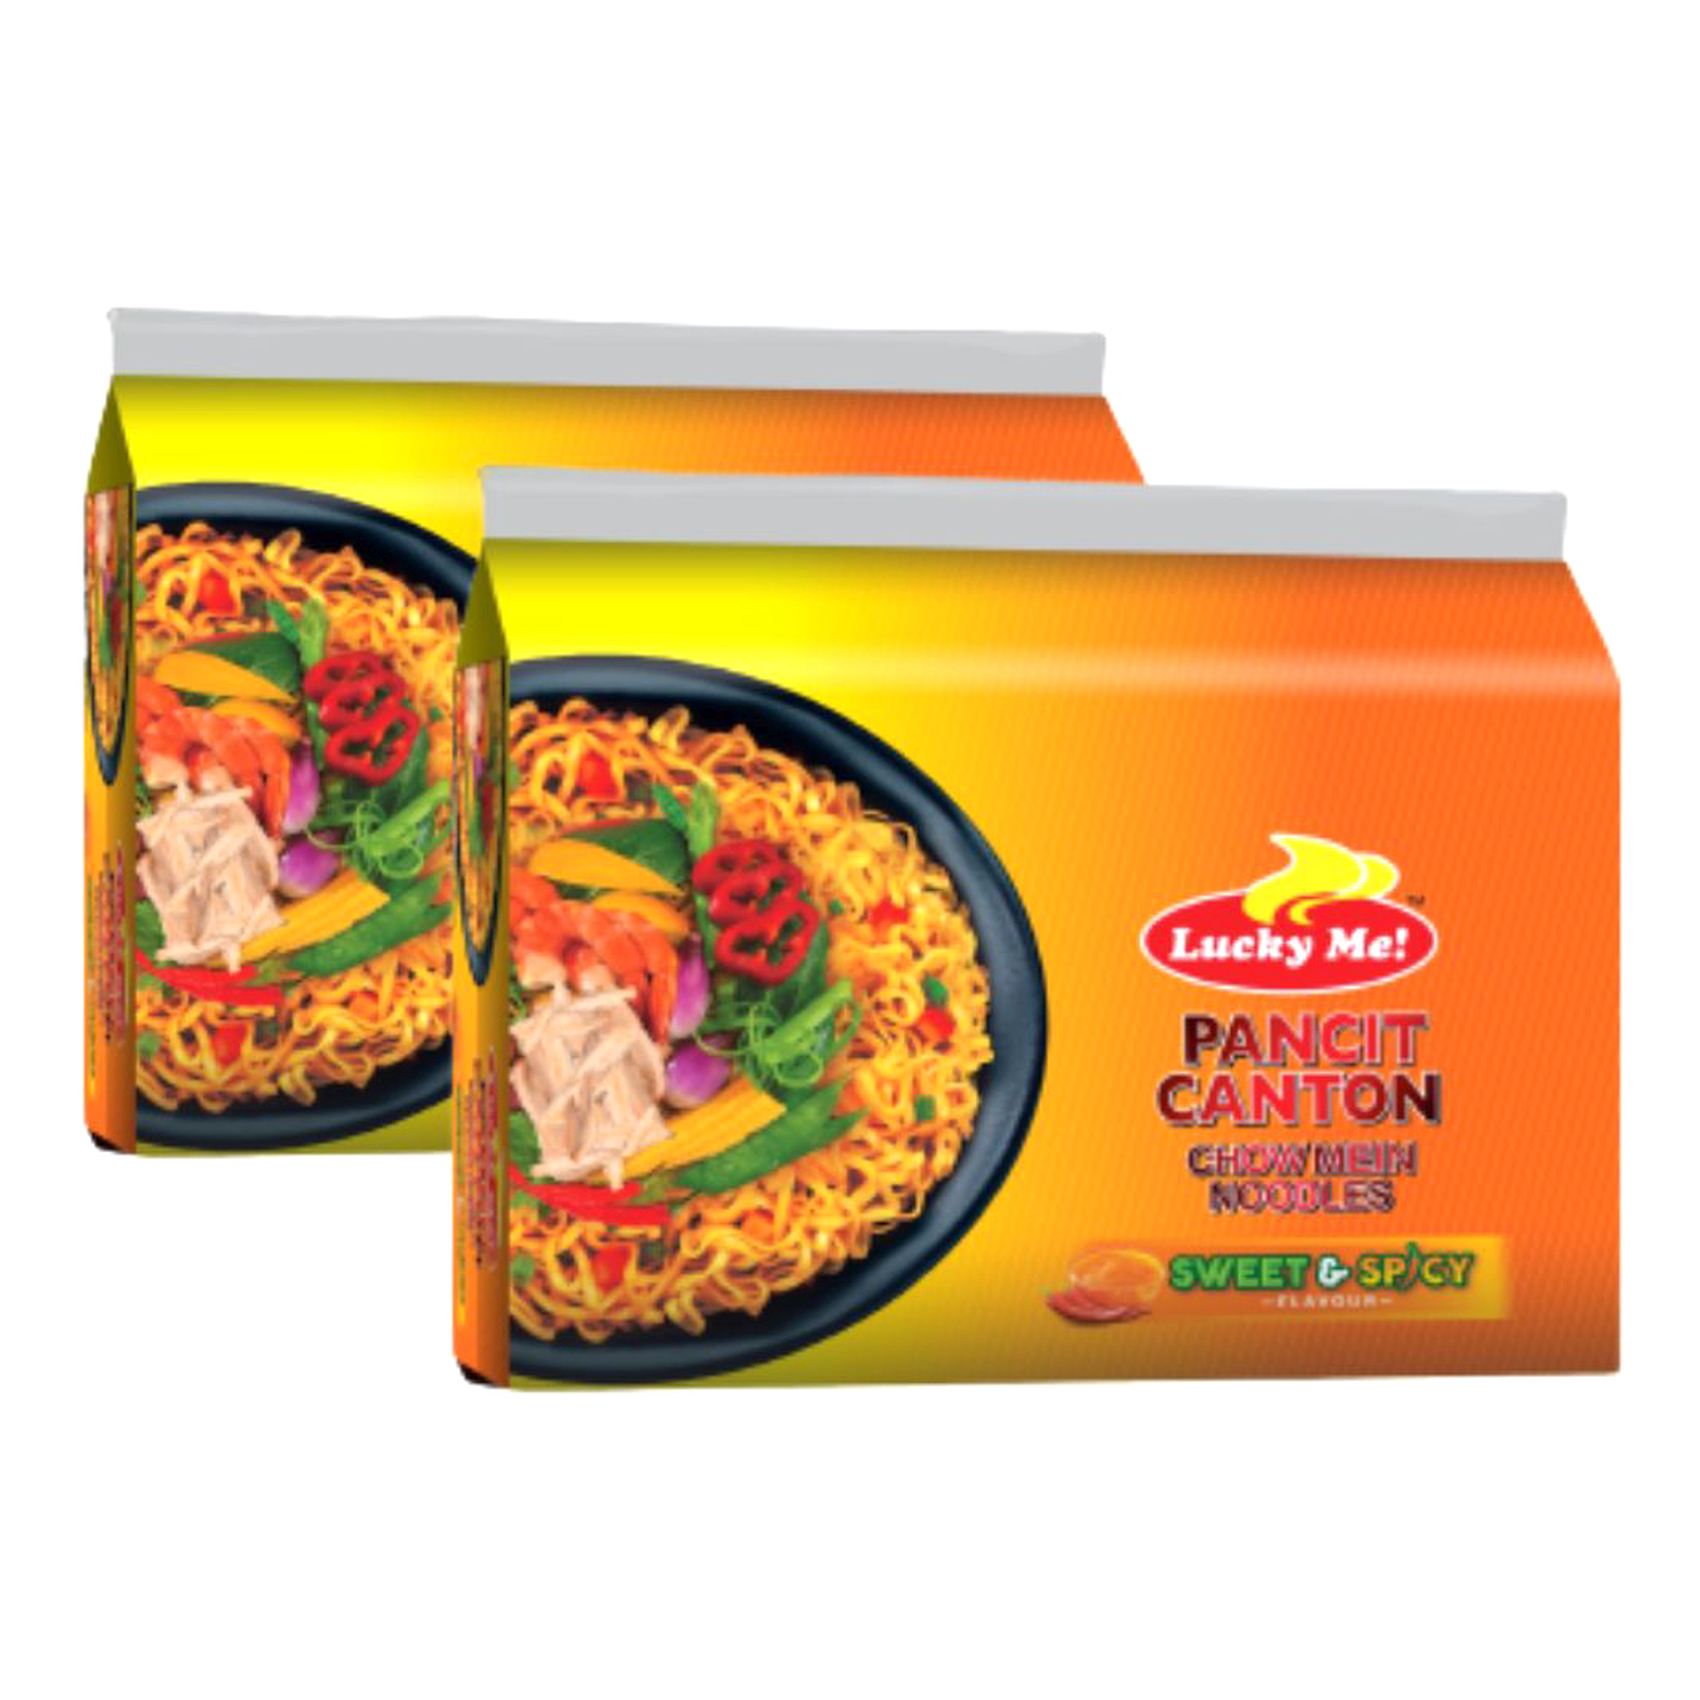 Lucky Me! Pancit Canton Chowmein Noodles Sweet And Spicy Flavour 6 Noodles 60g Pack of 2